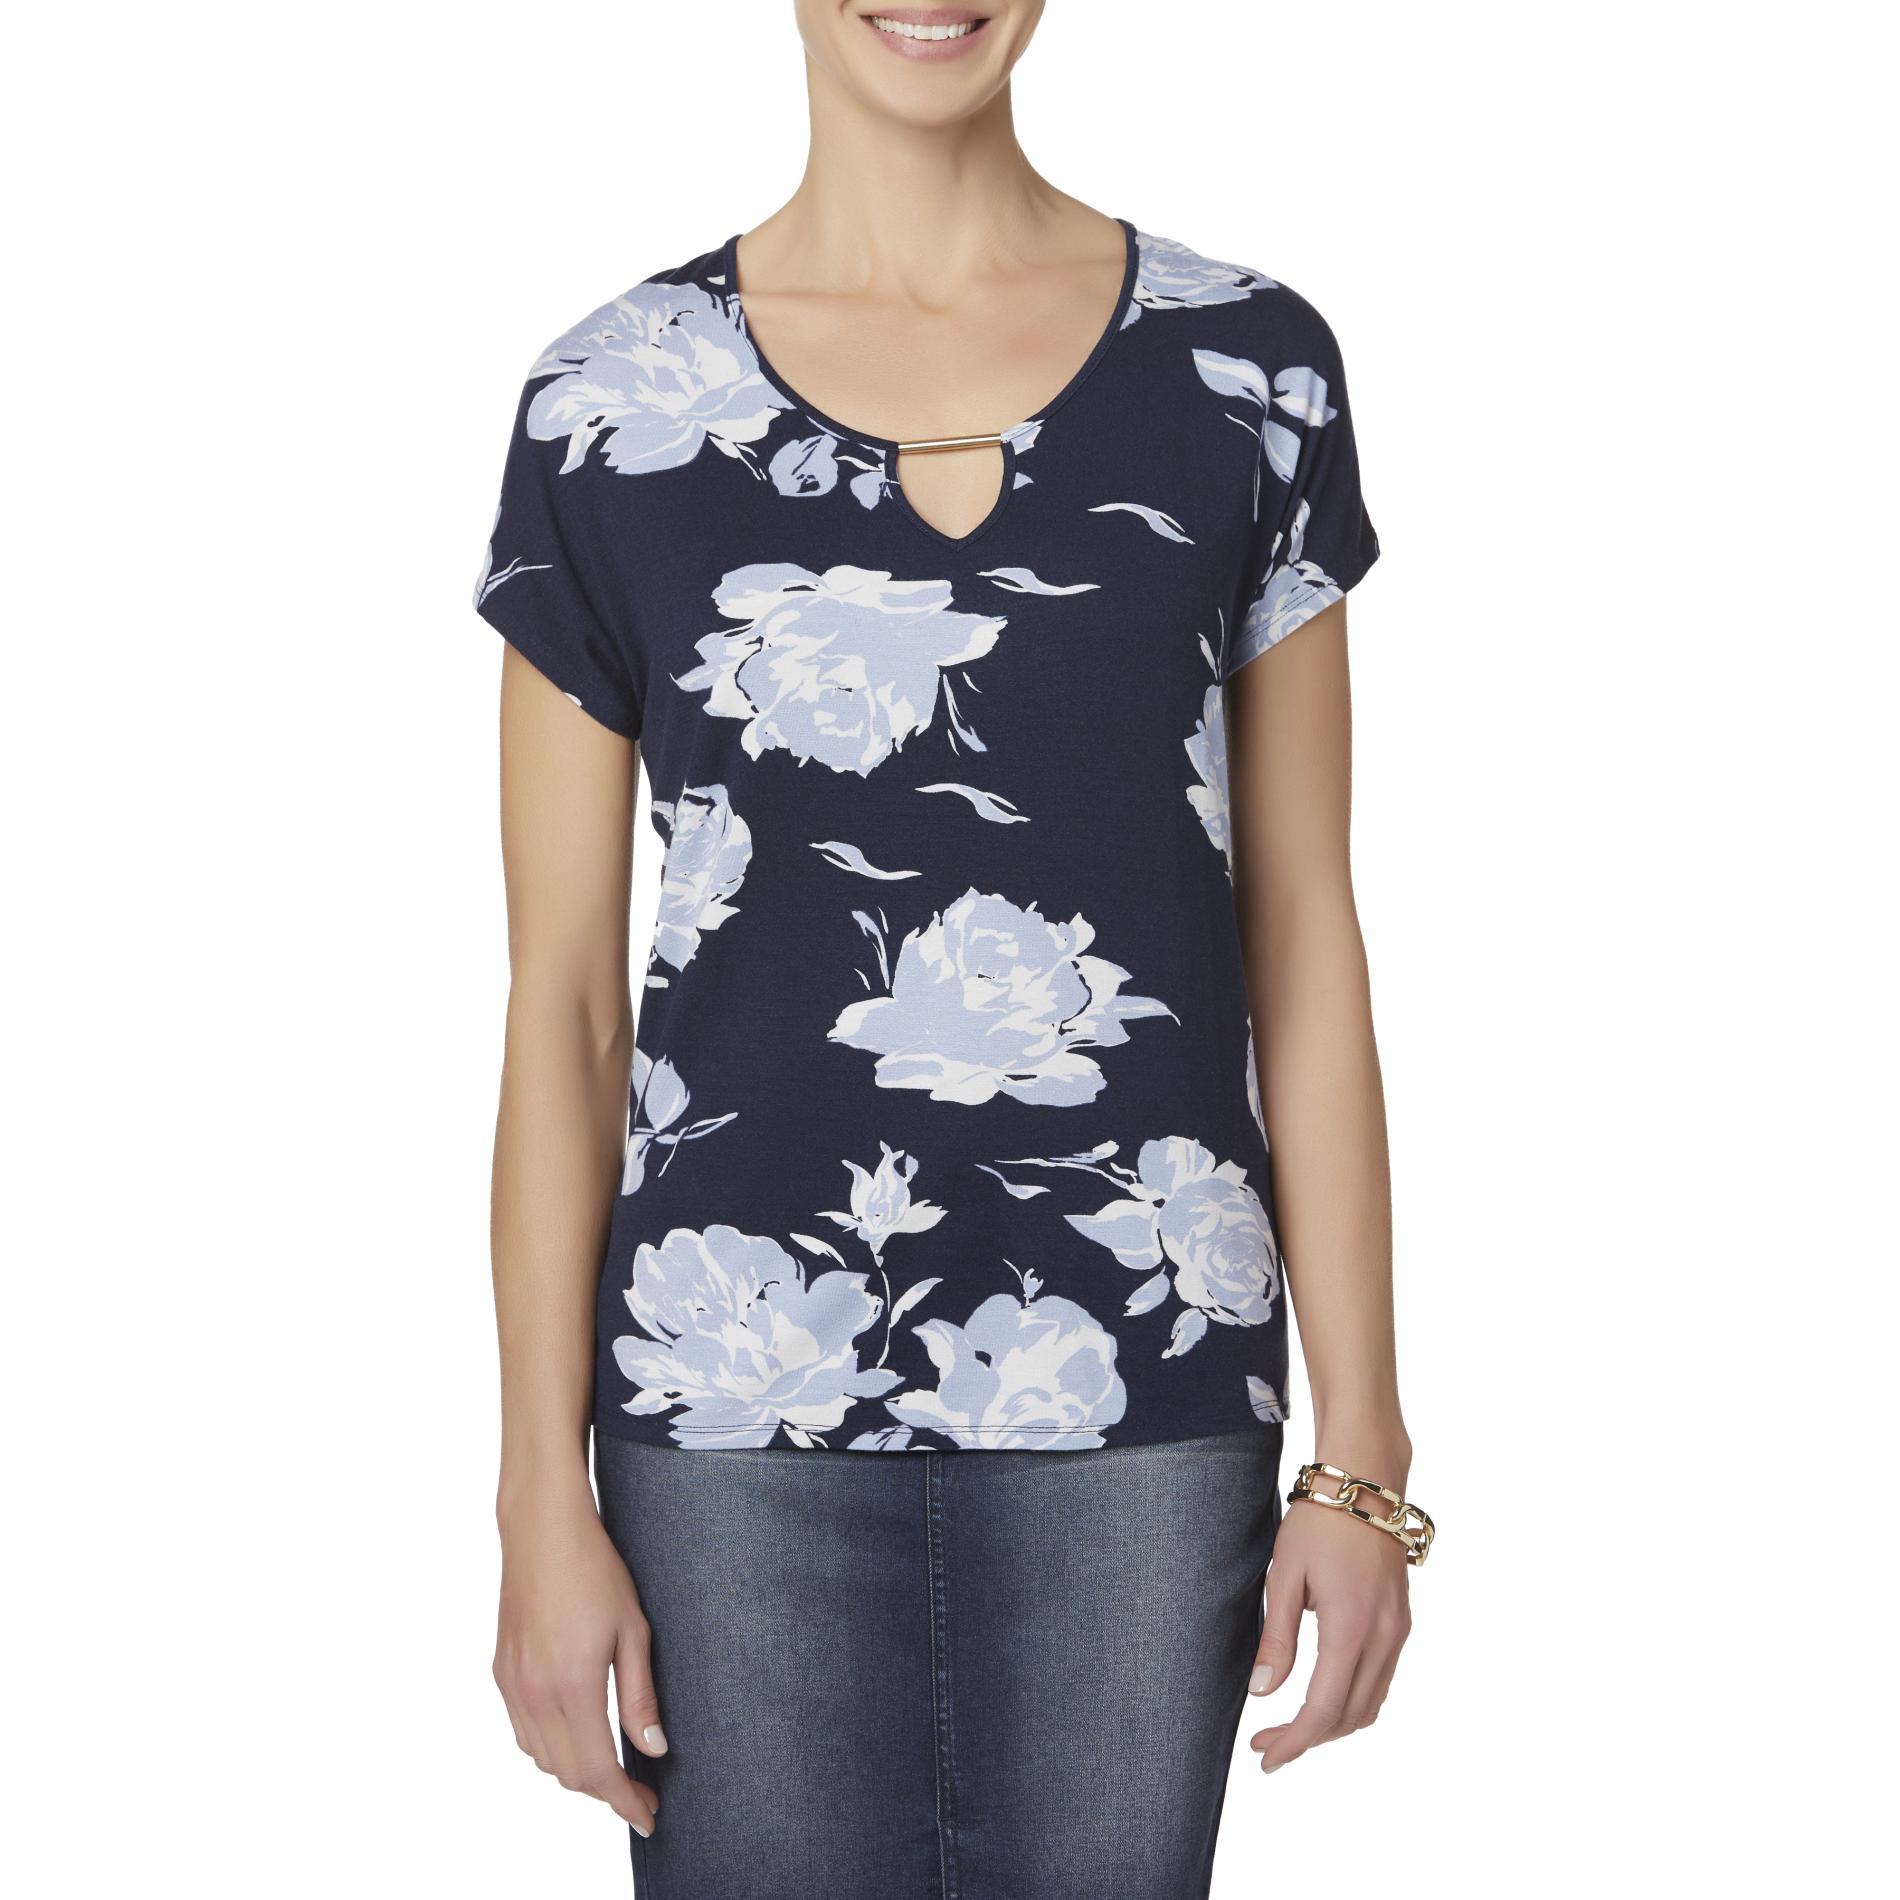 Jaclyn Smith Women's Keyhole Top - Floral